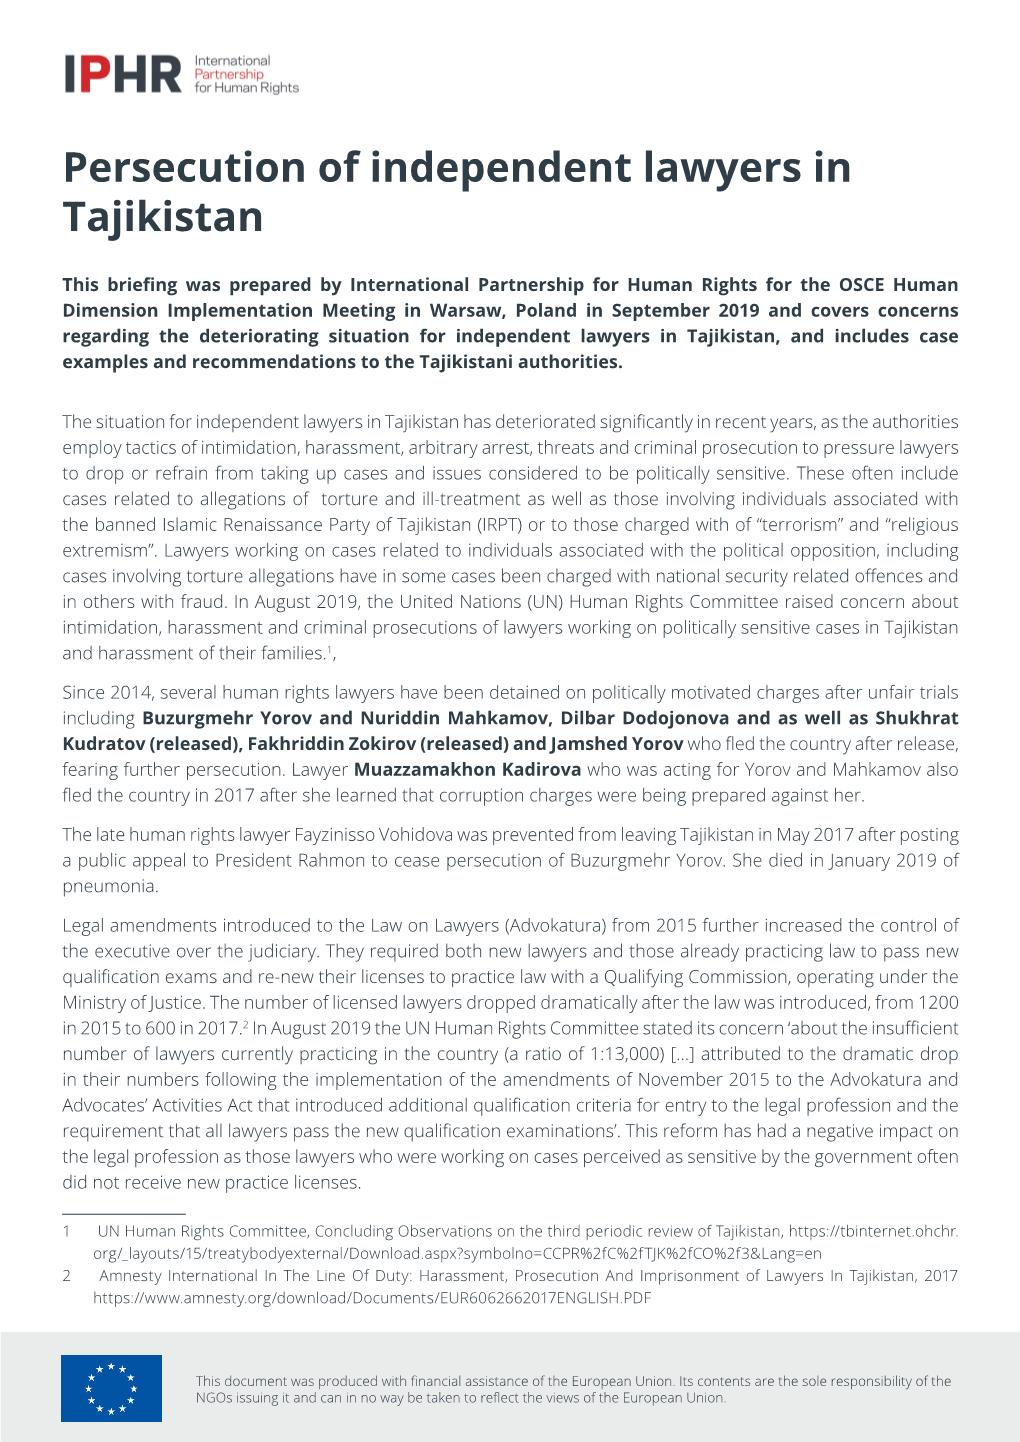 Persecution of Independent Lawyers in Tajikistan